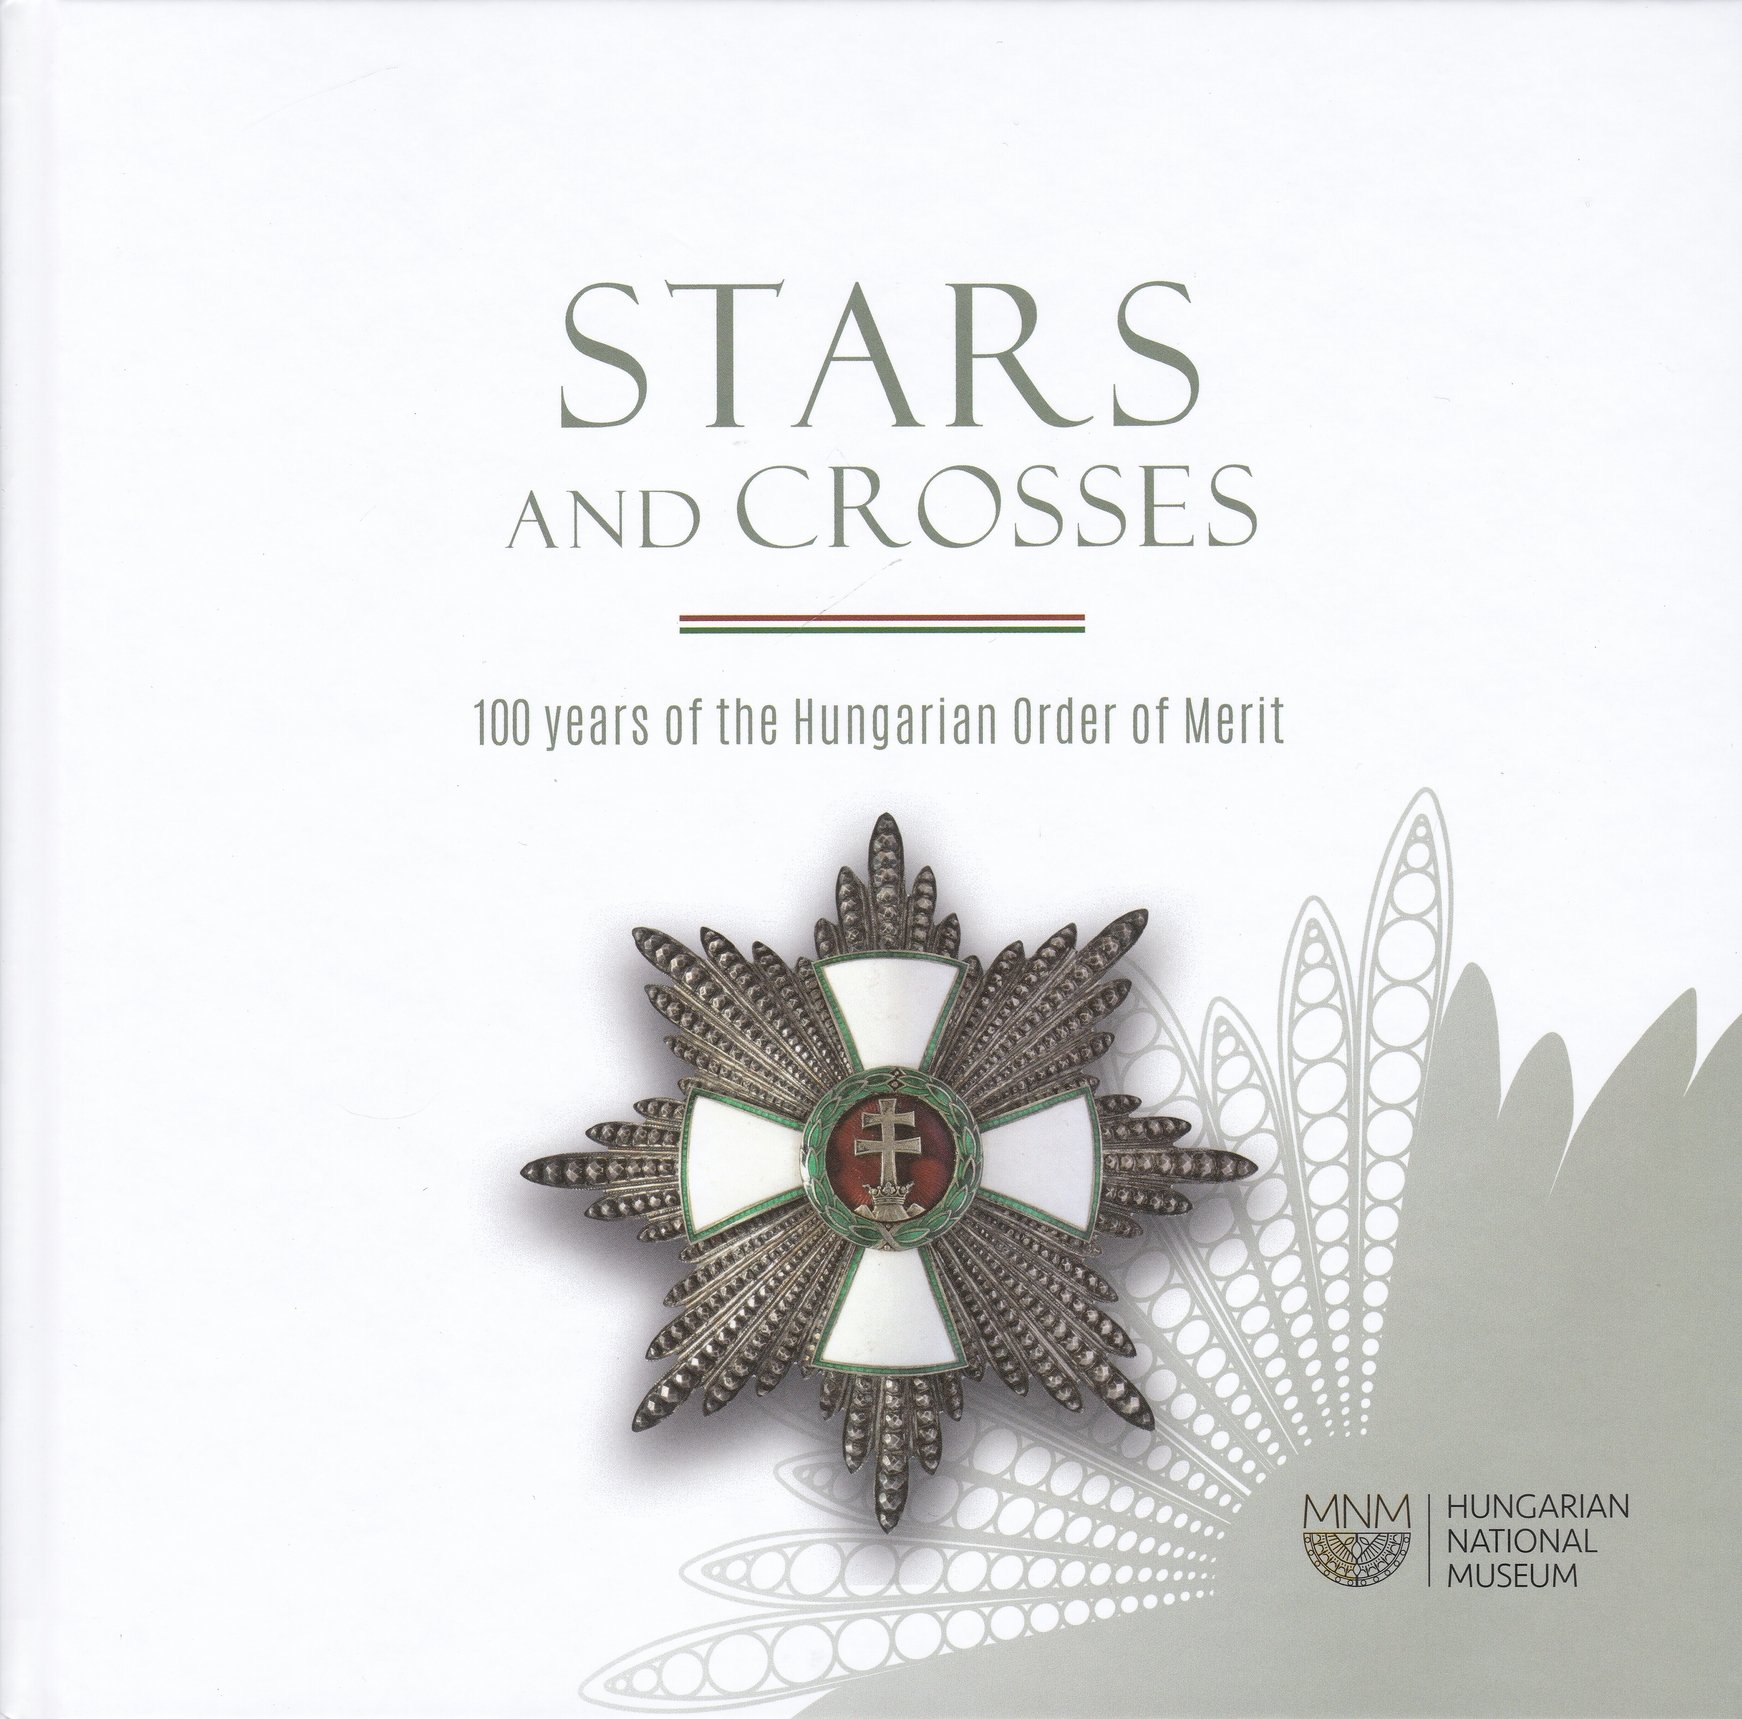 Stars and crosses. 100 years of the Hungarian Order of Merit (Rippl-Rónai Múzeum CC BY-NC-ND)